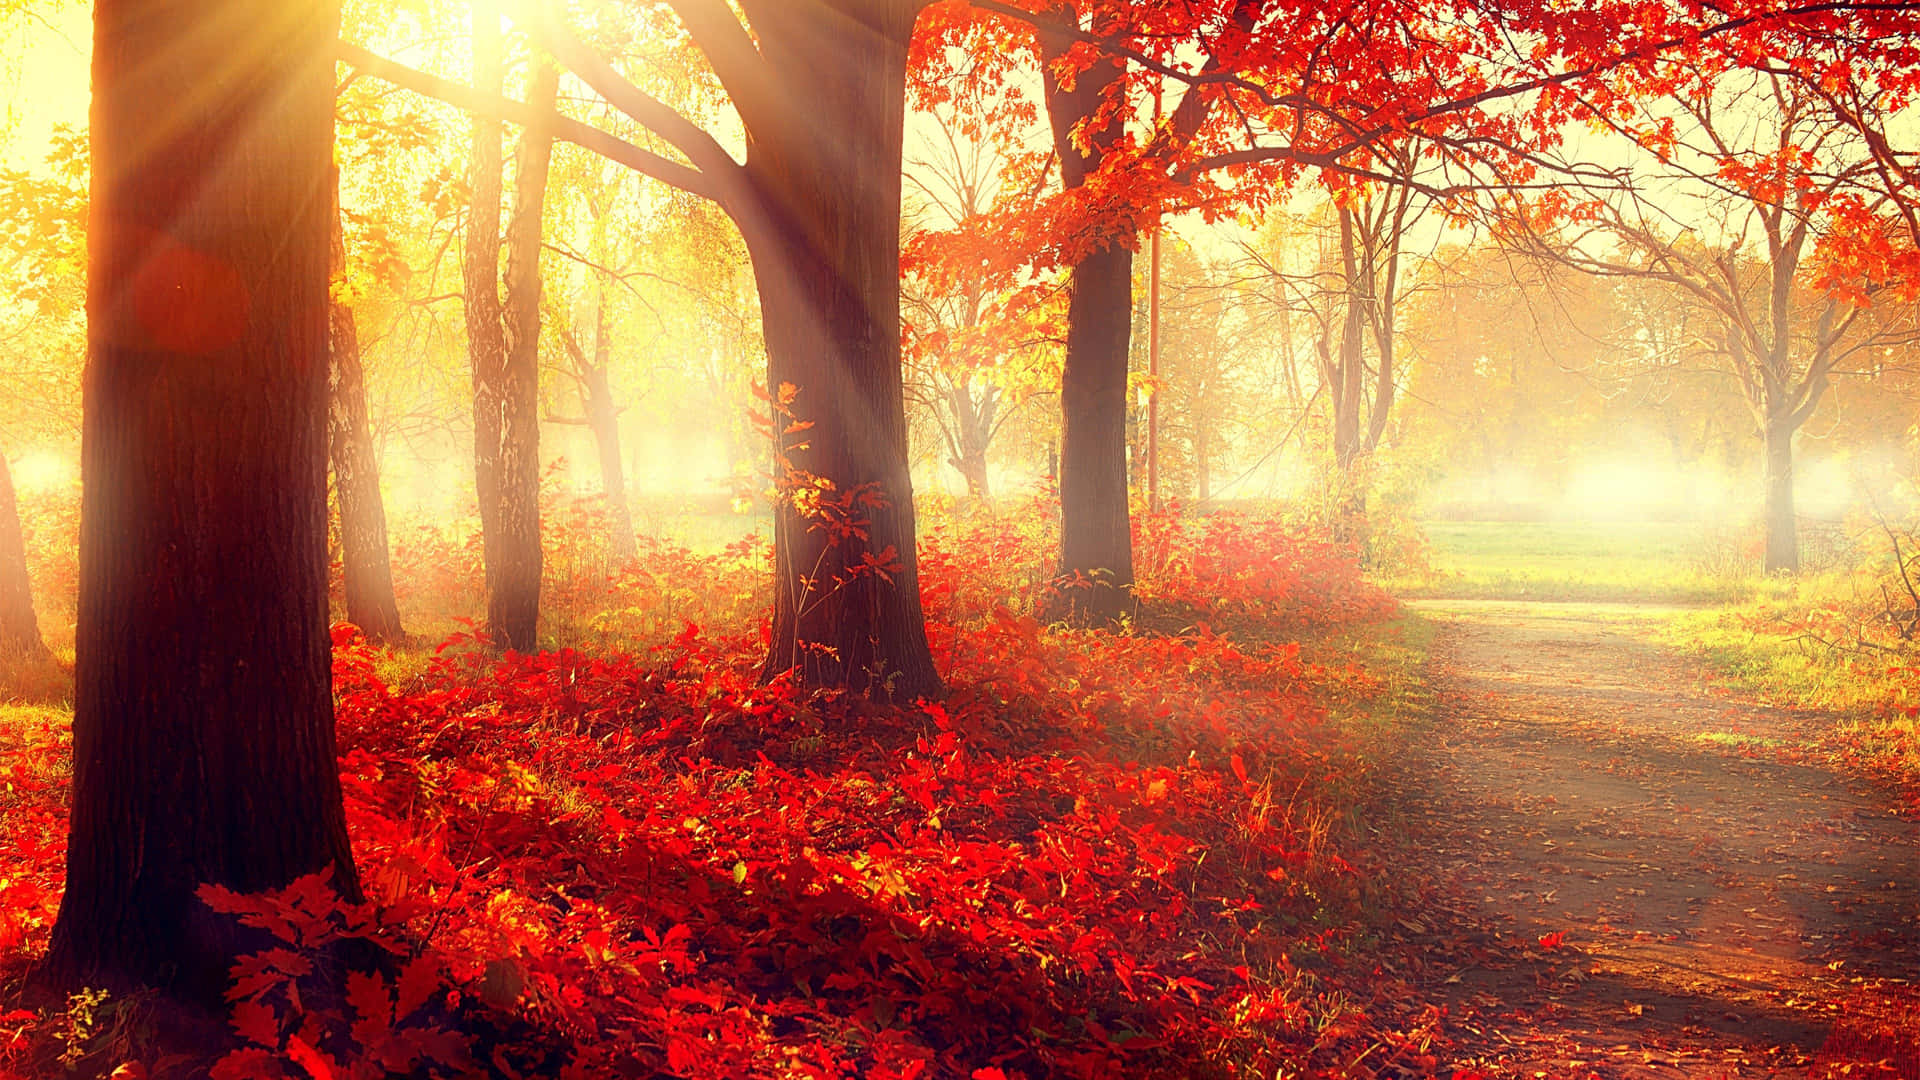 Red Maple Trees Autumn Aesthetic Background